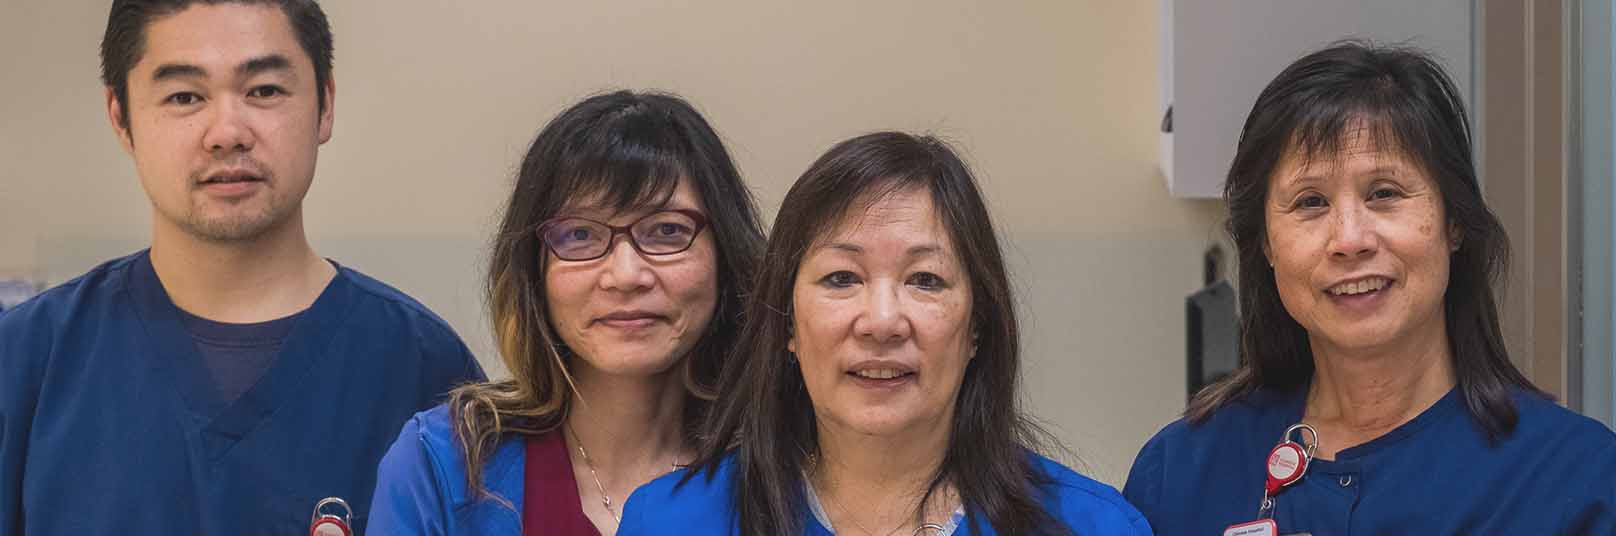 EMPLOYEE SPOTLIGHT: Elena Wong, CPU Manager, retires after 45 years at Chinese Hospital